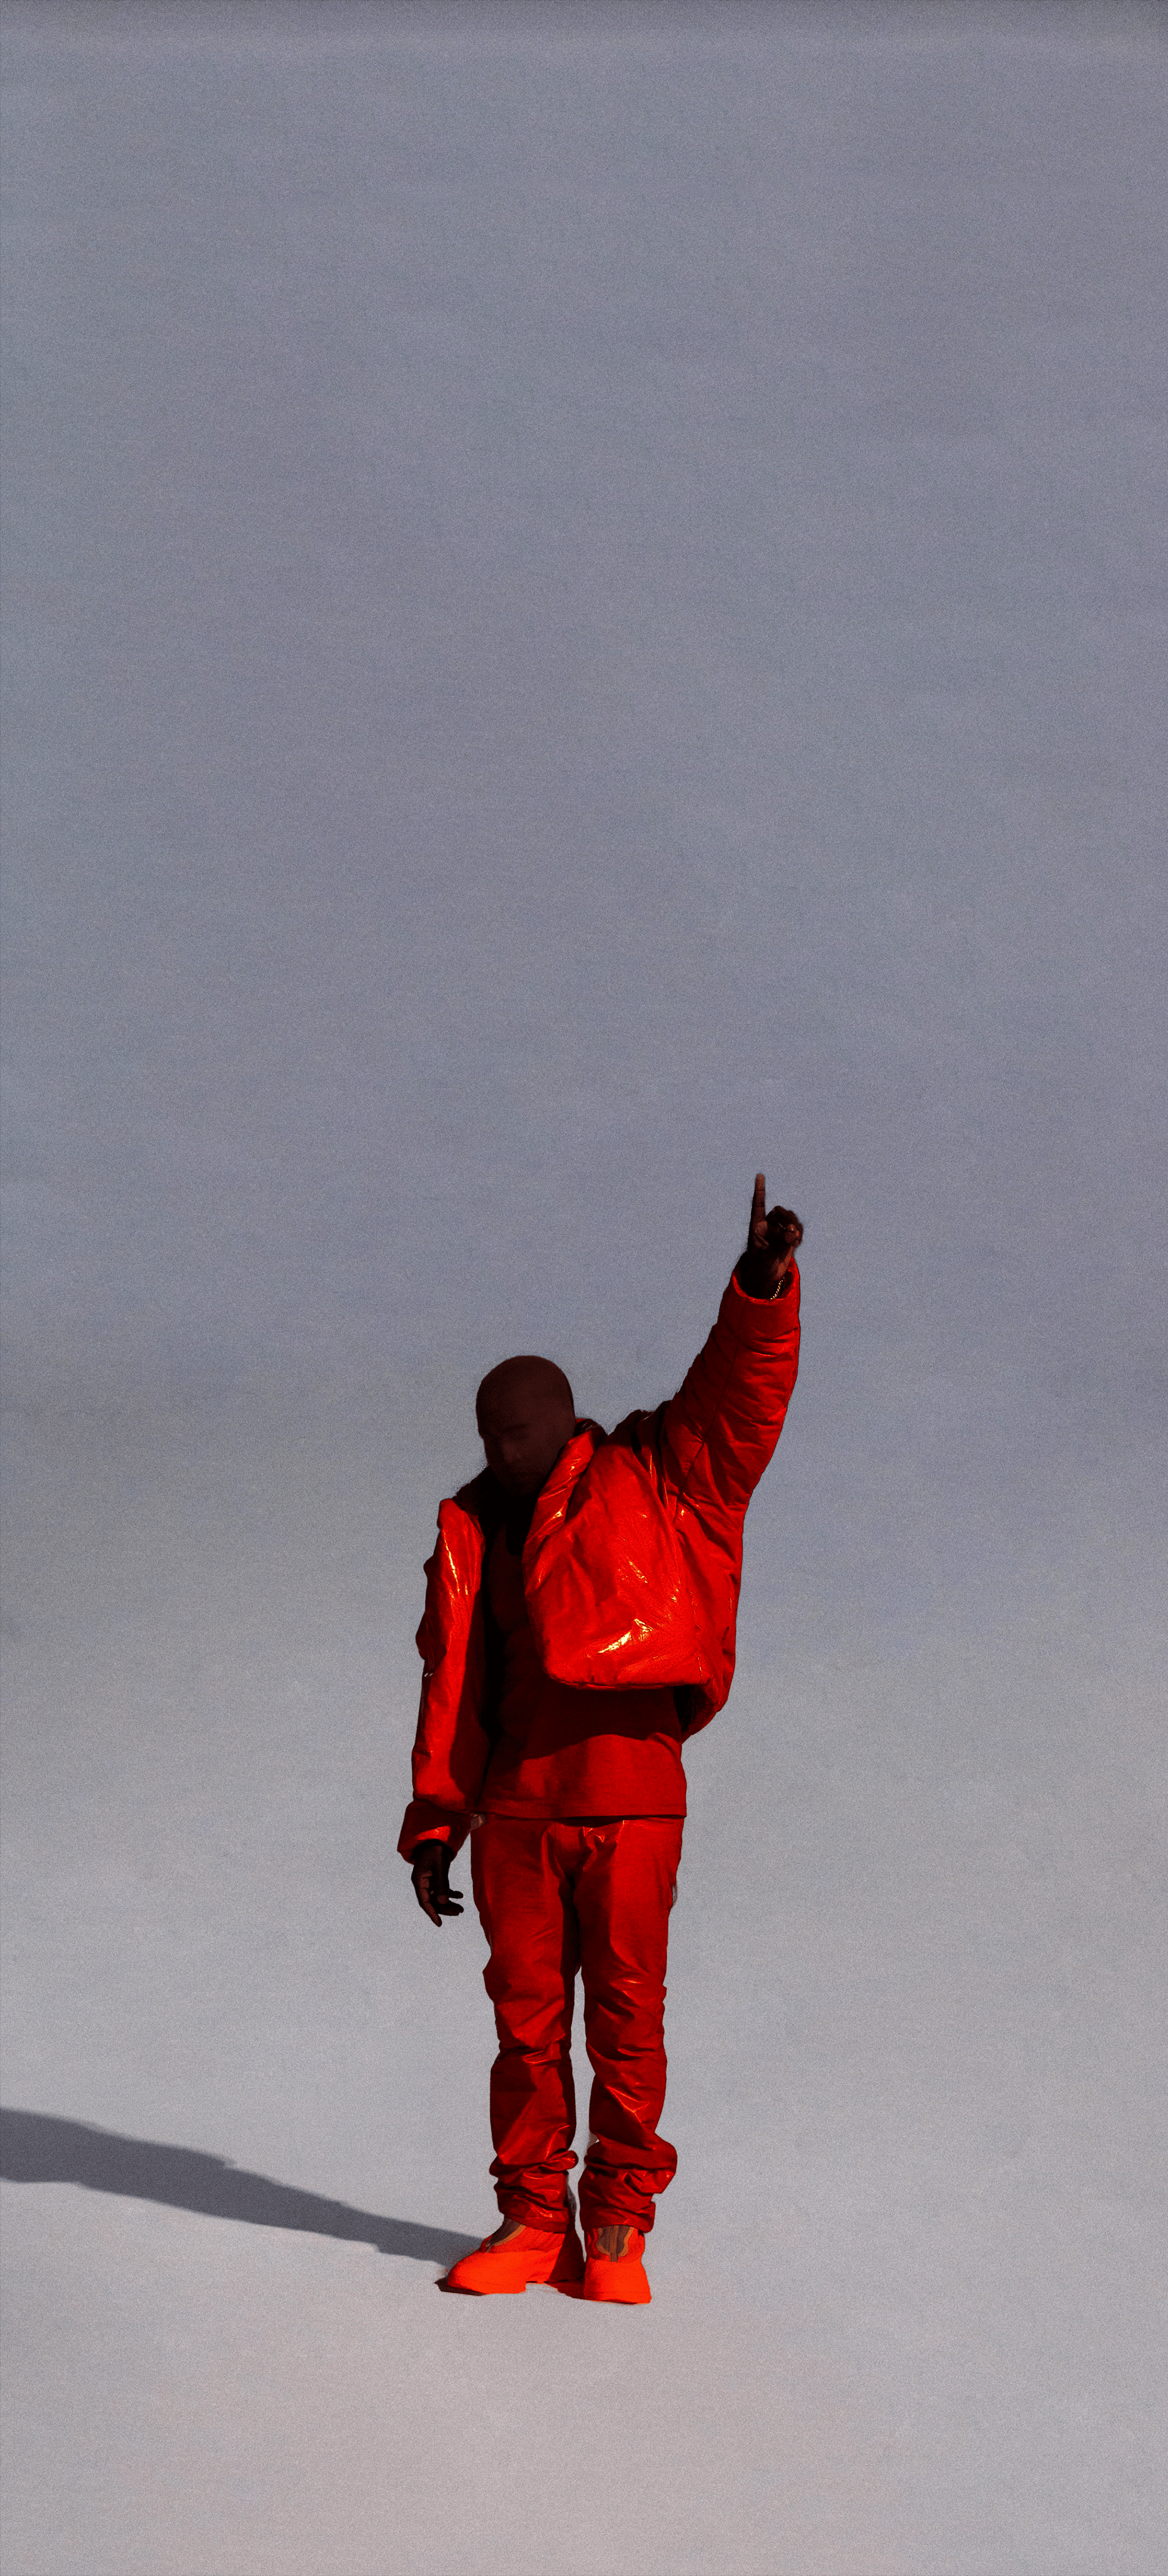 Kanye Wes Wallpapers